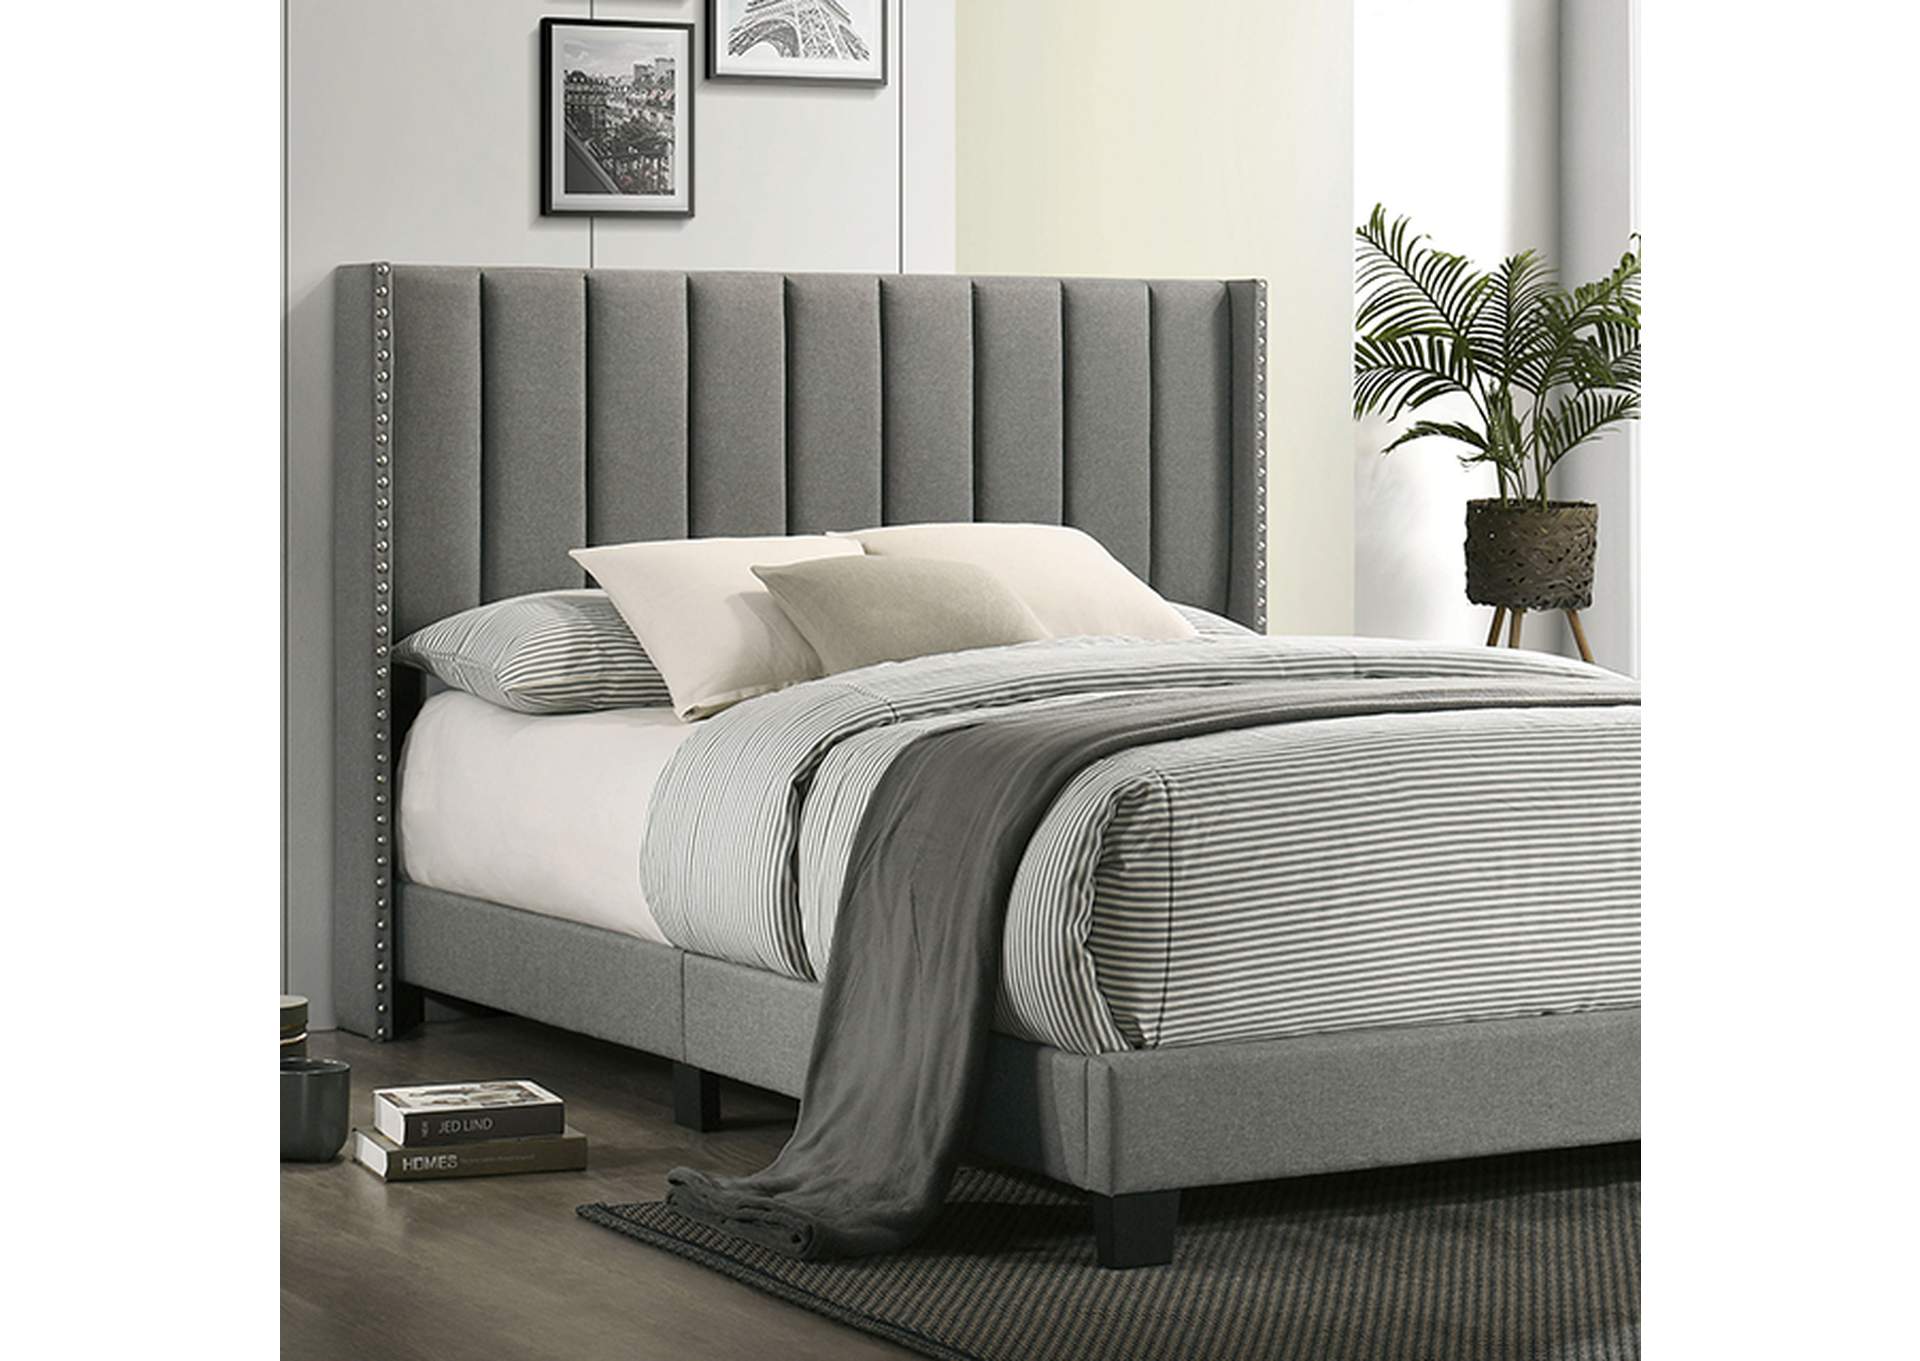 Kailey Queen Bed,Furniture of America